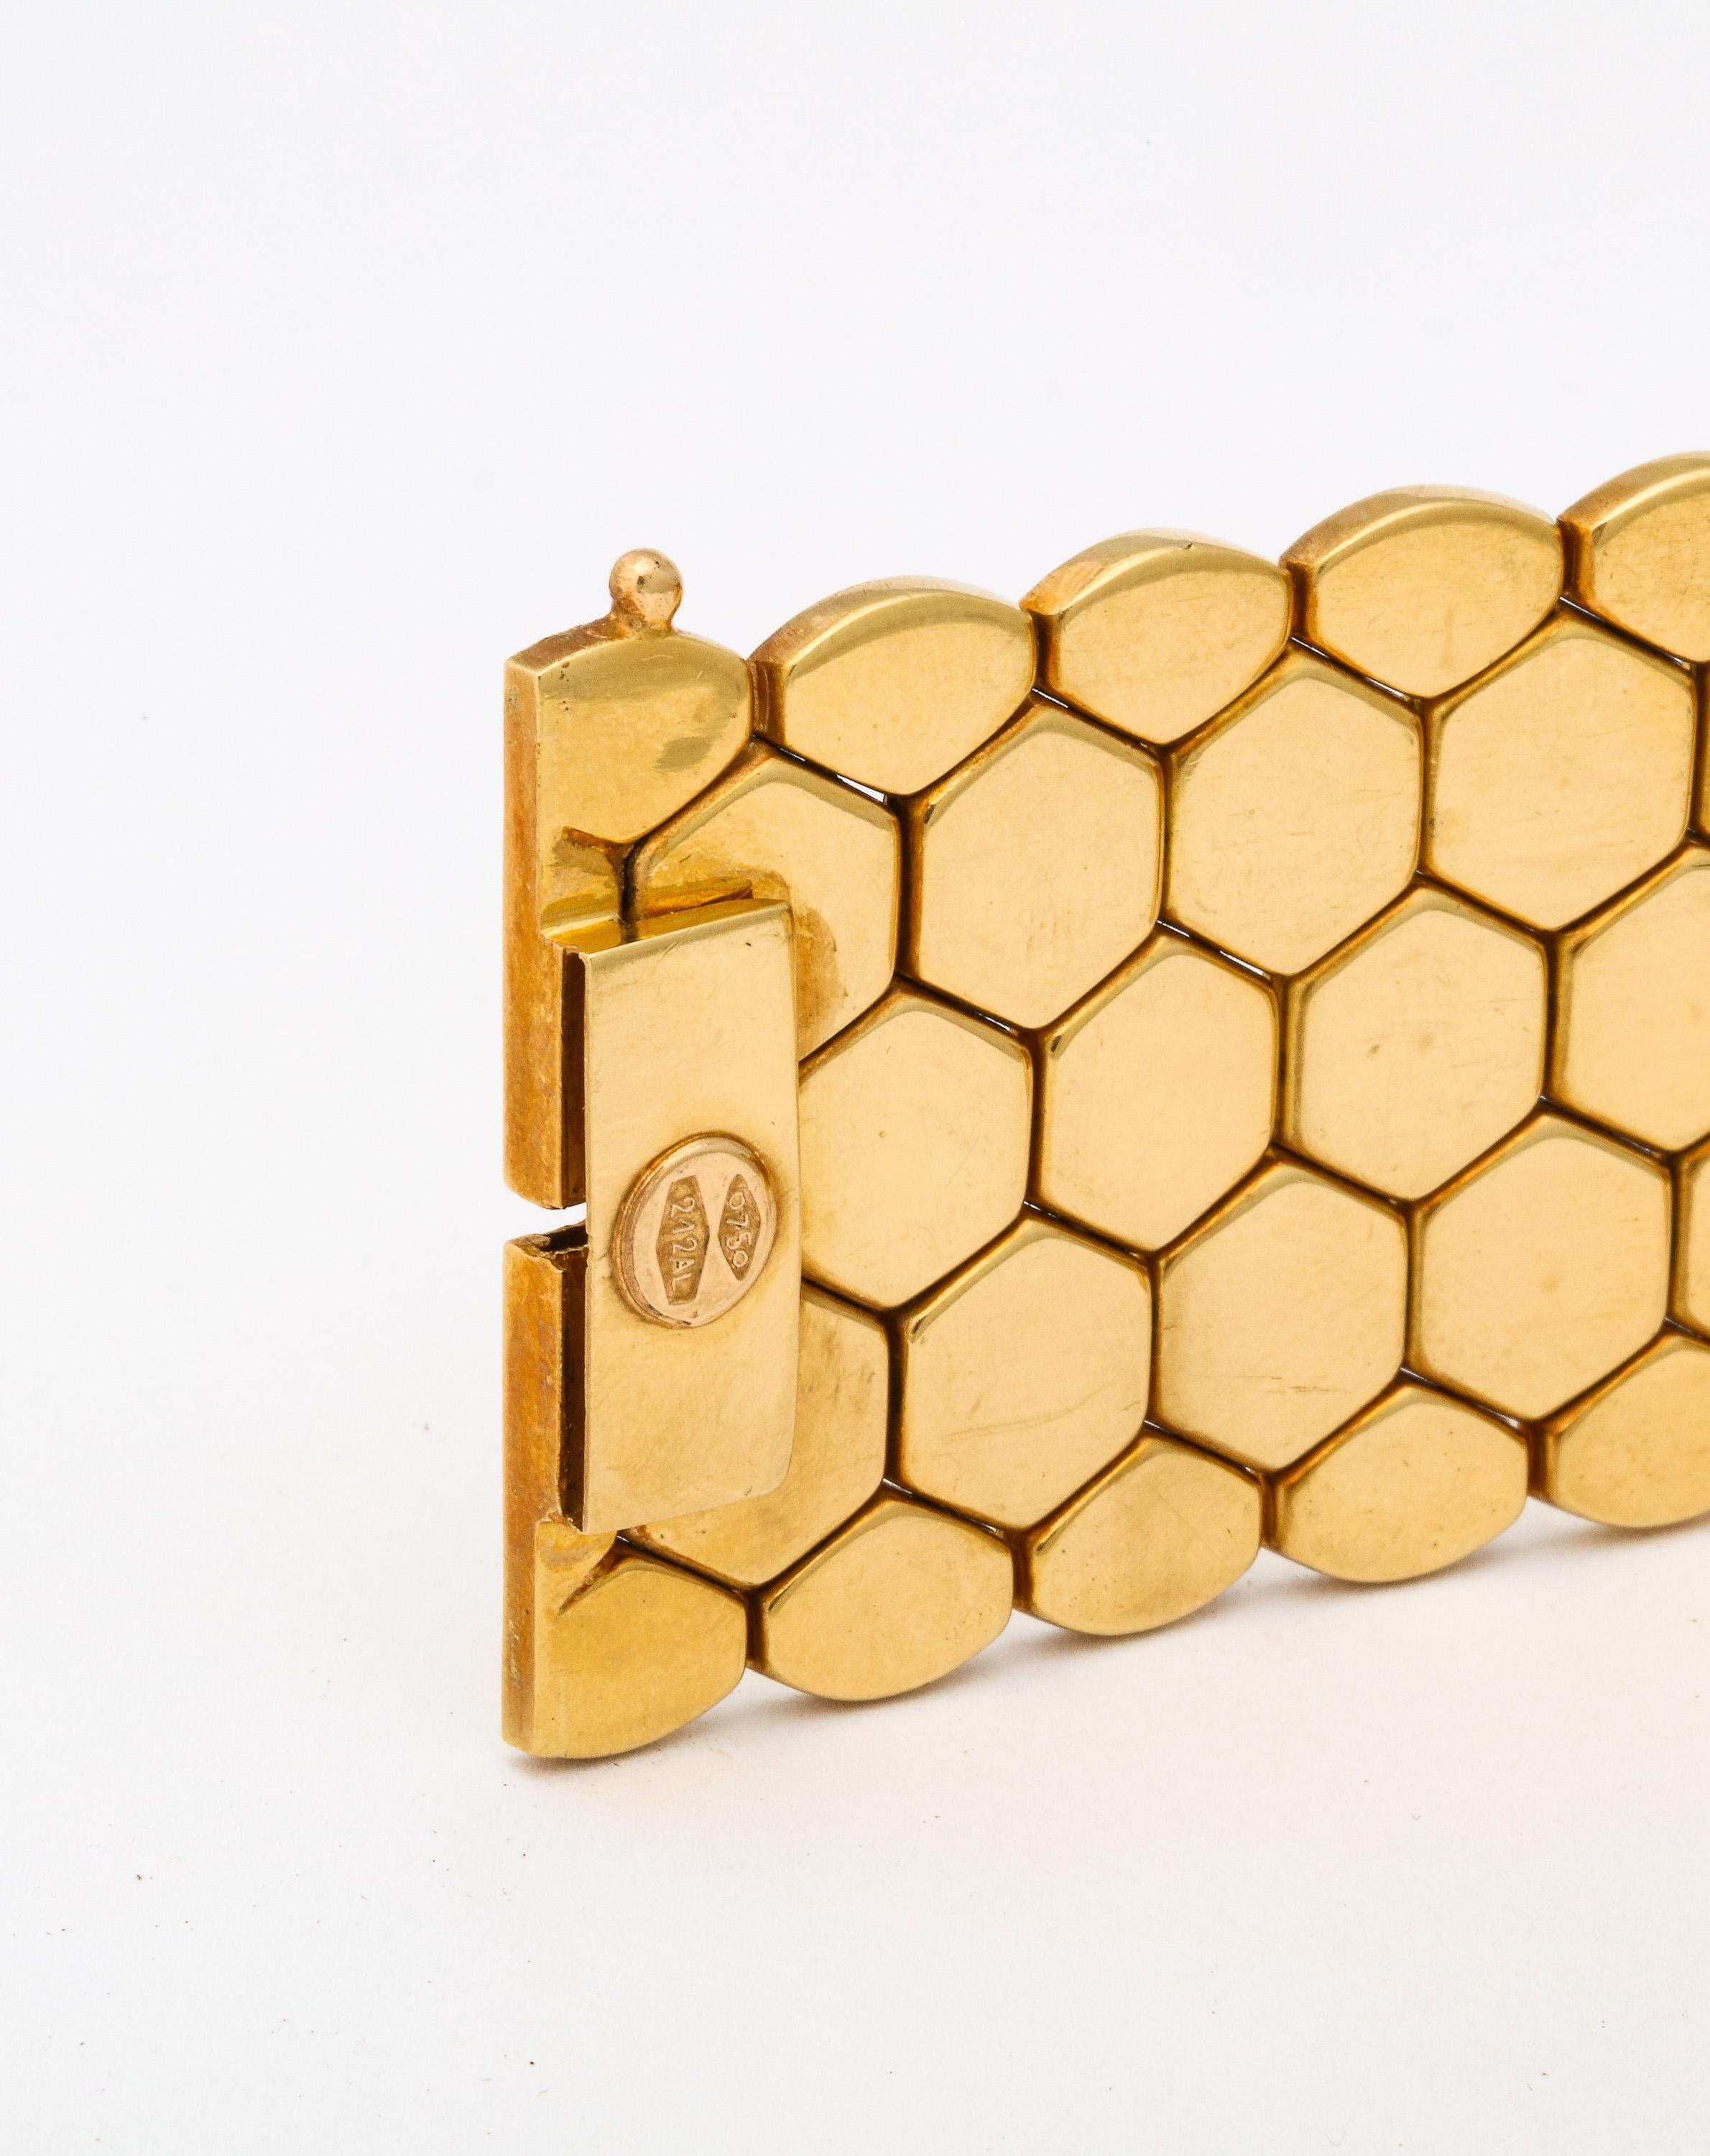 Women's Highly Polished Honeycomb Bracelet with Concealed Box Clasp and Safety